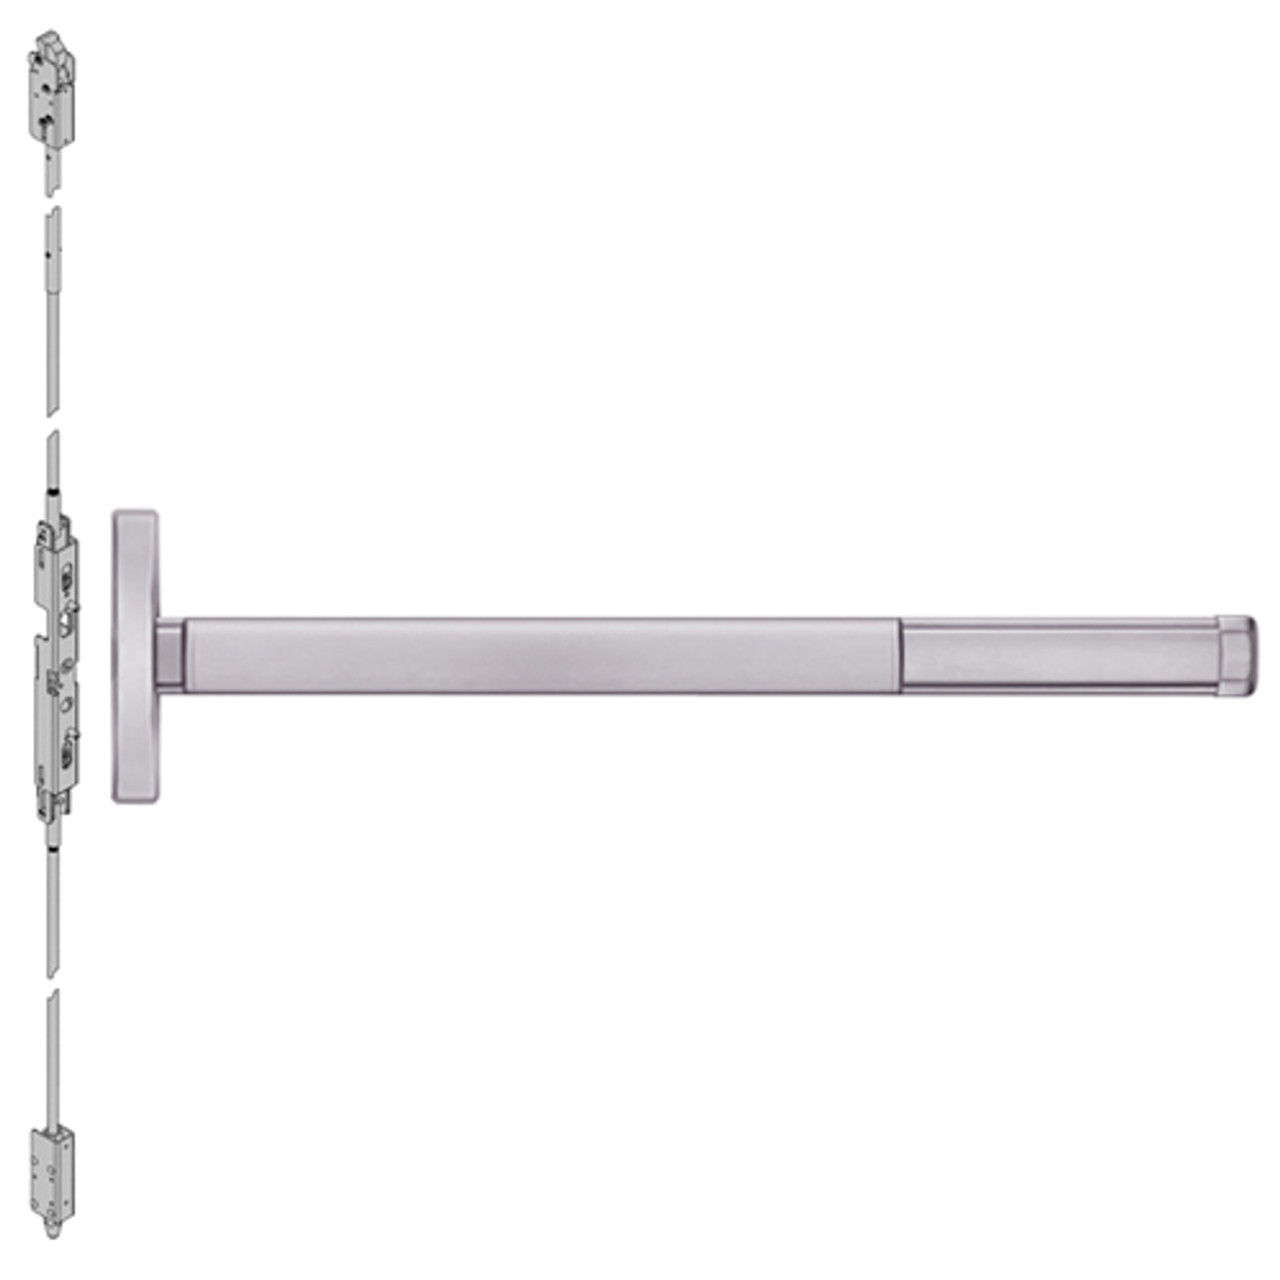 FL2602-630-48 PHI 2600 Series Fire Rated Concealed Vertical Rod Exit Device Prepped for Dummy Trim in Satin Stainless Steel Finish